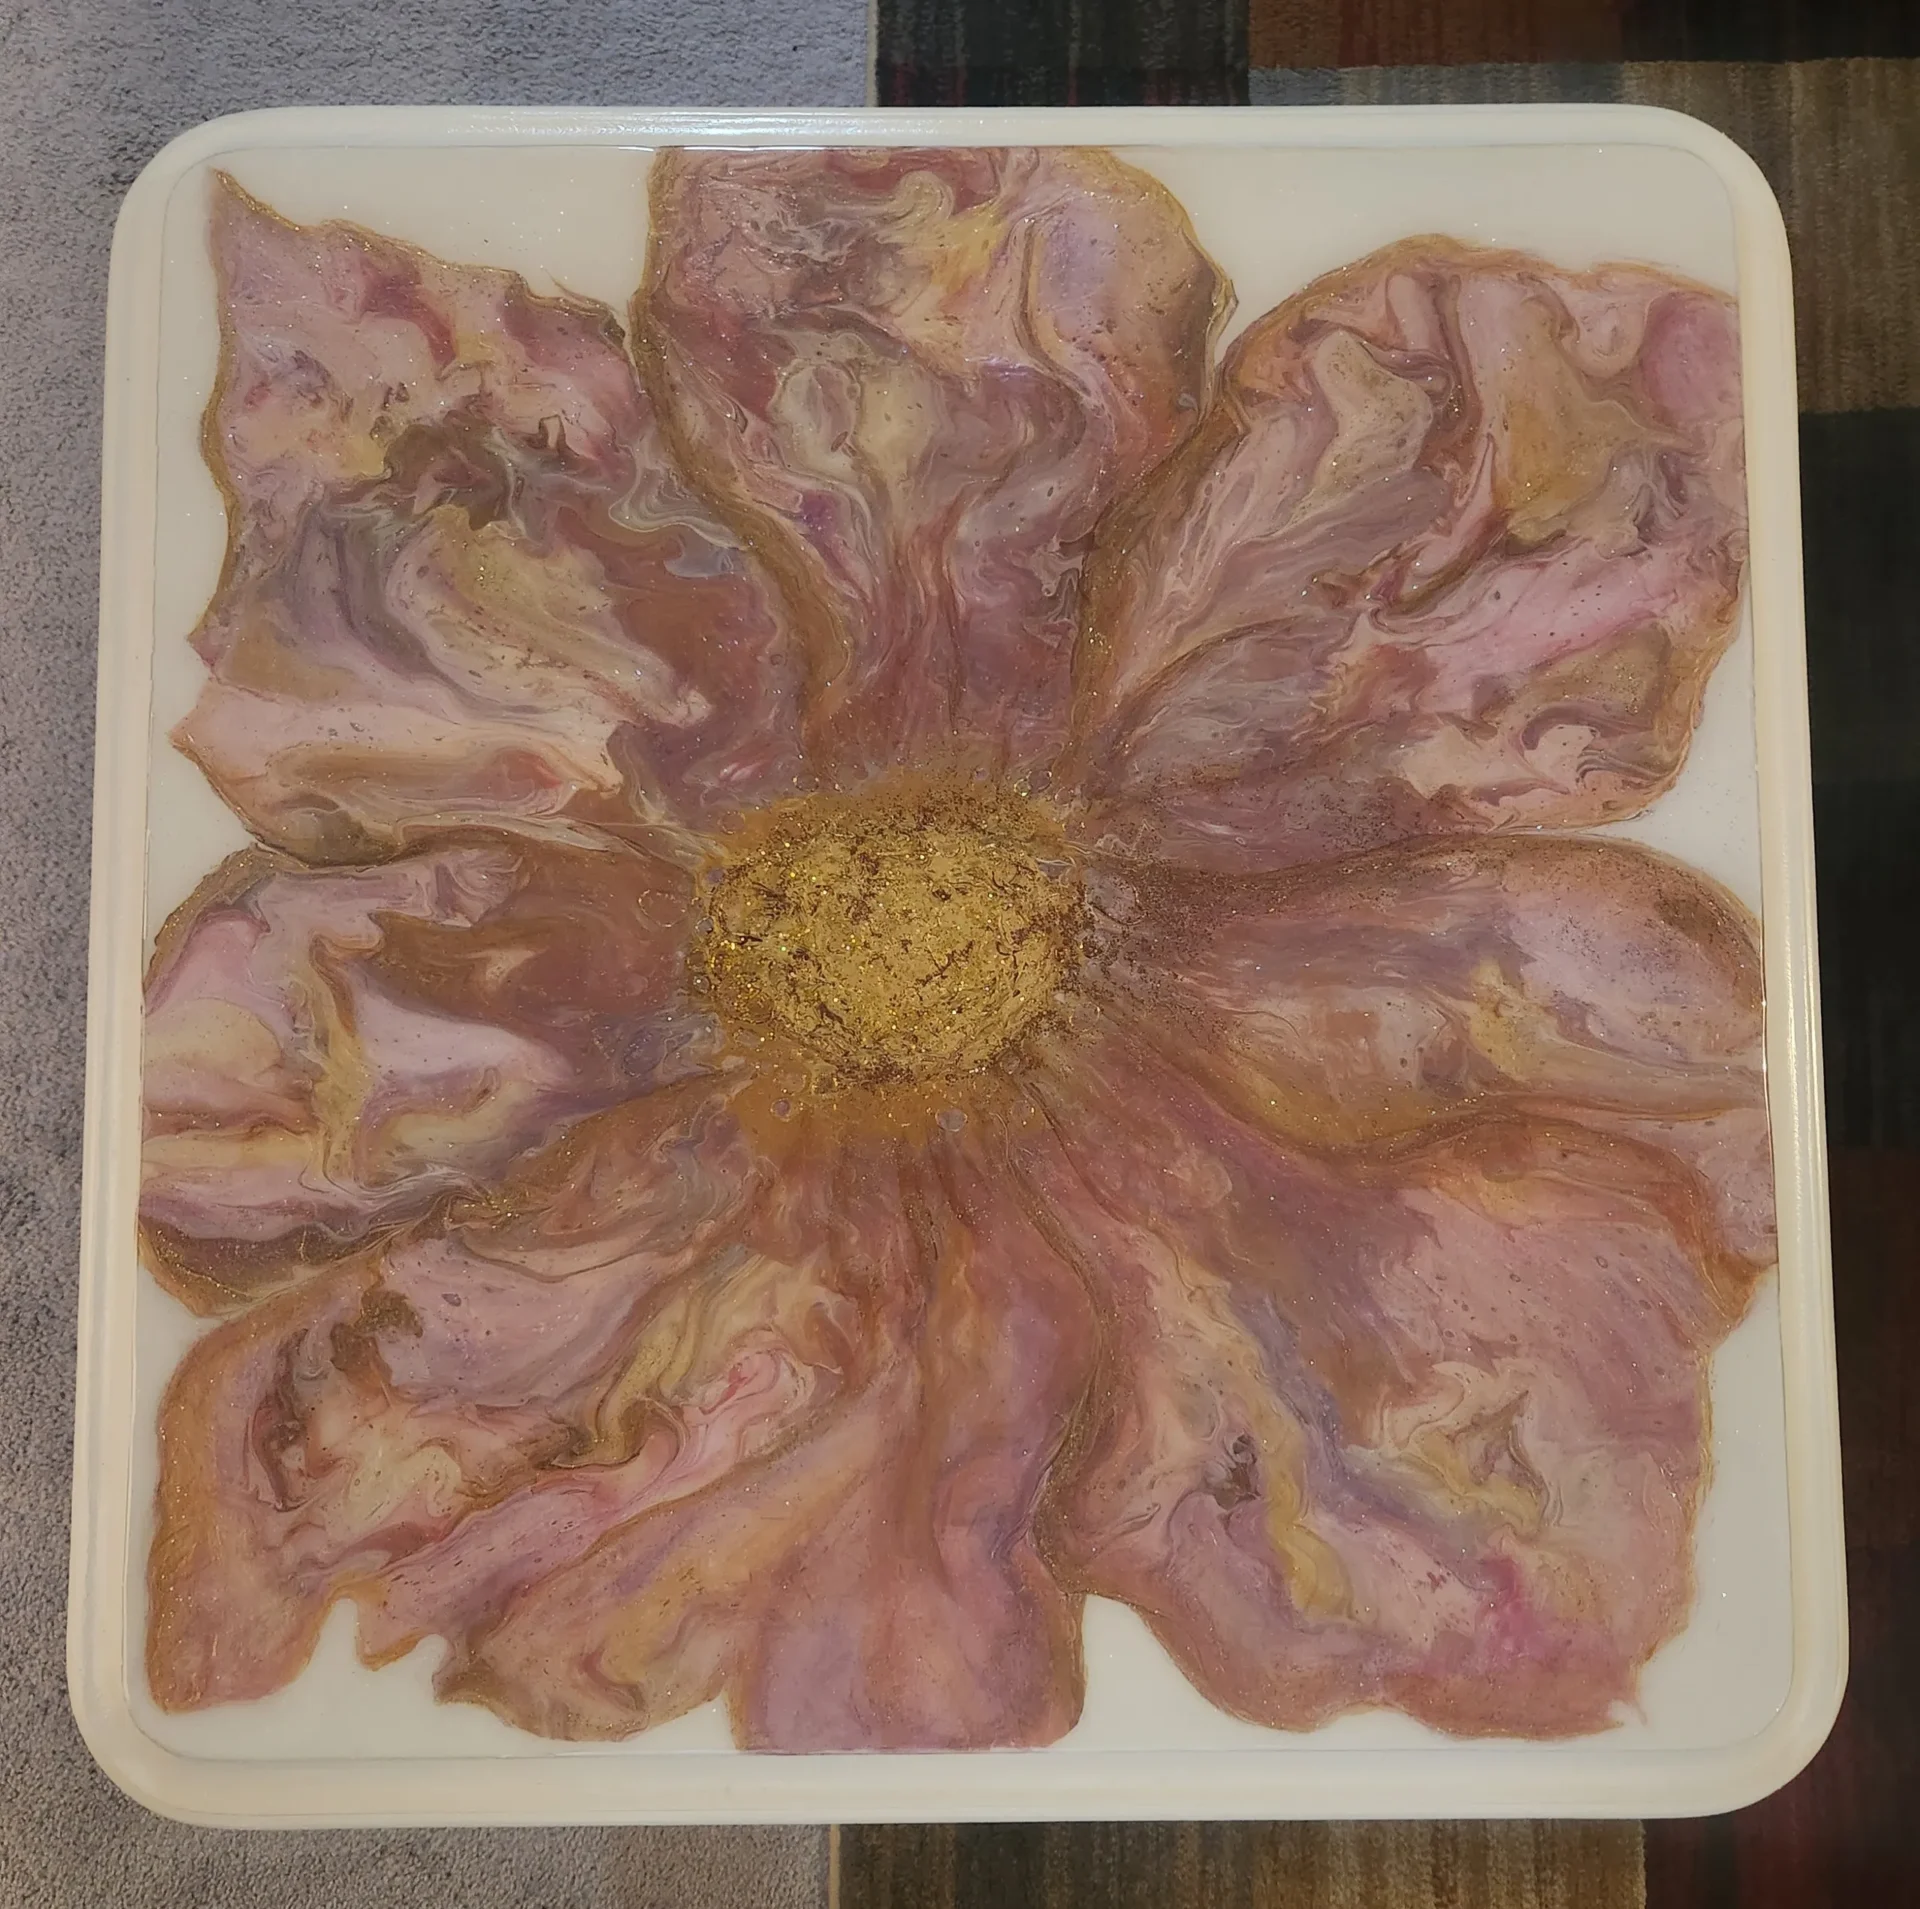 A flower made of bacon on top of a plate.